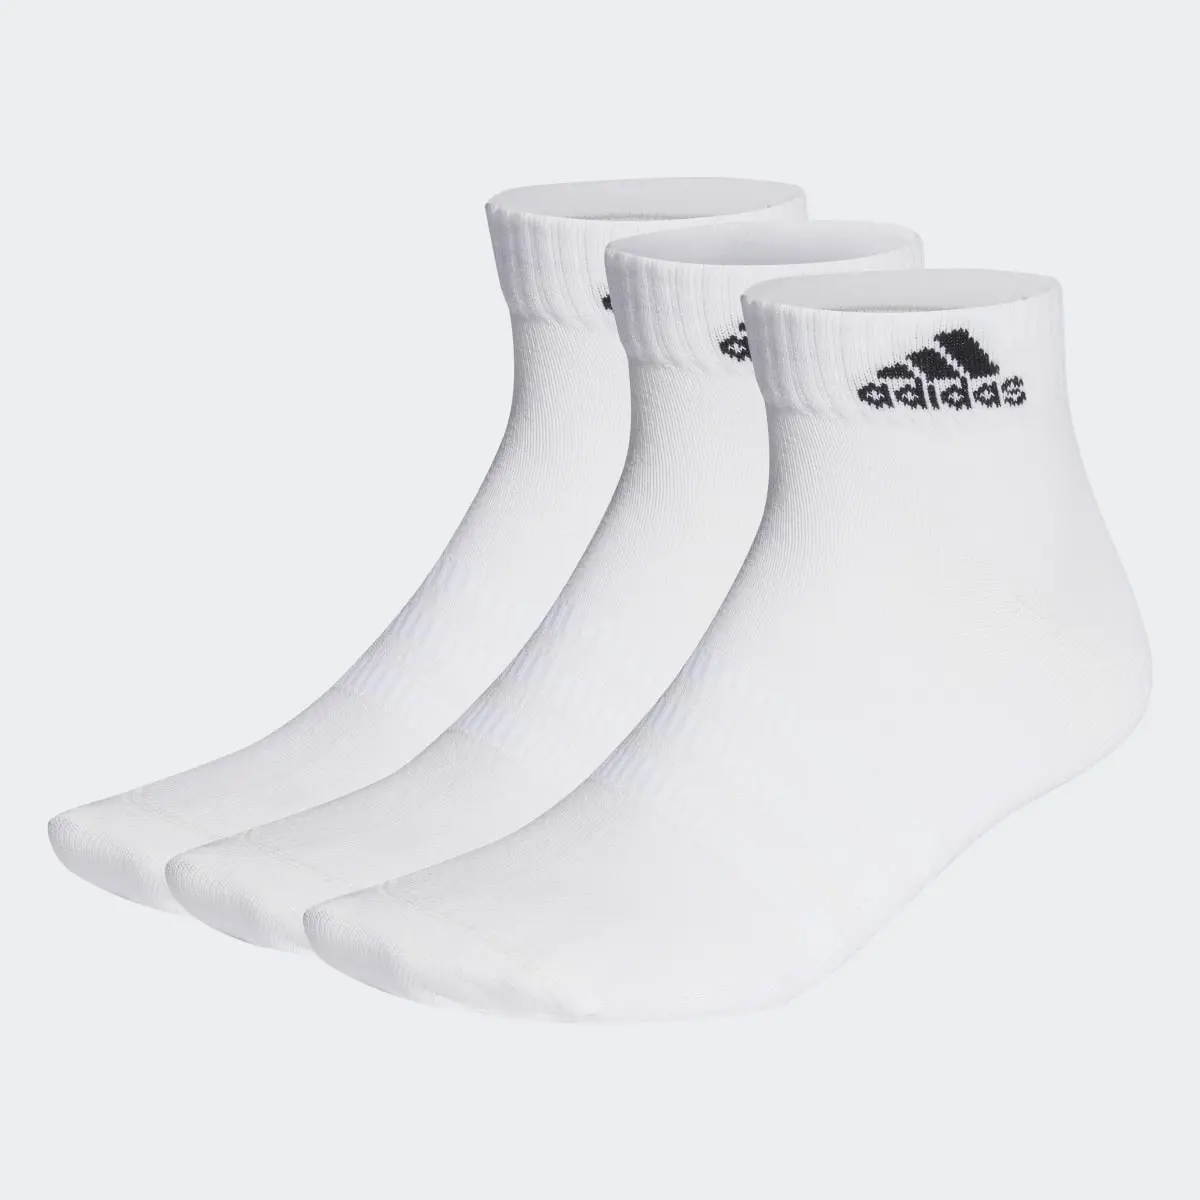 Adidas Thin and Light Ankle Socks 3 Pairs. 2